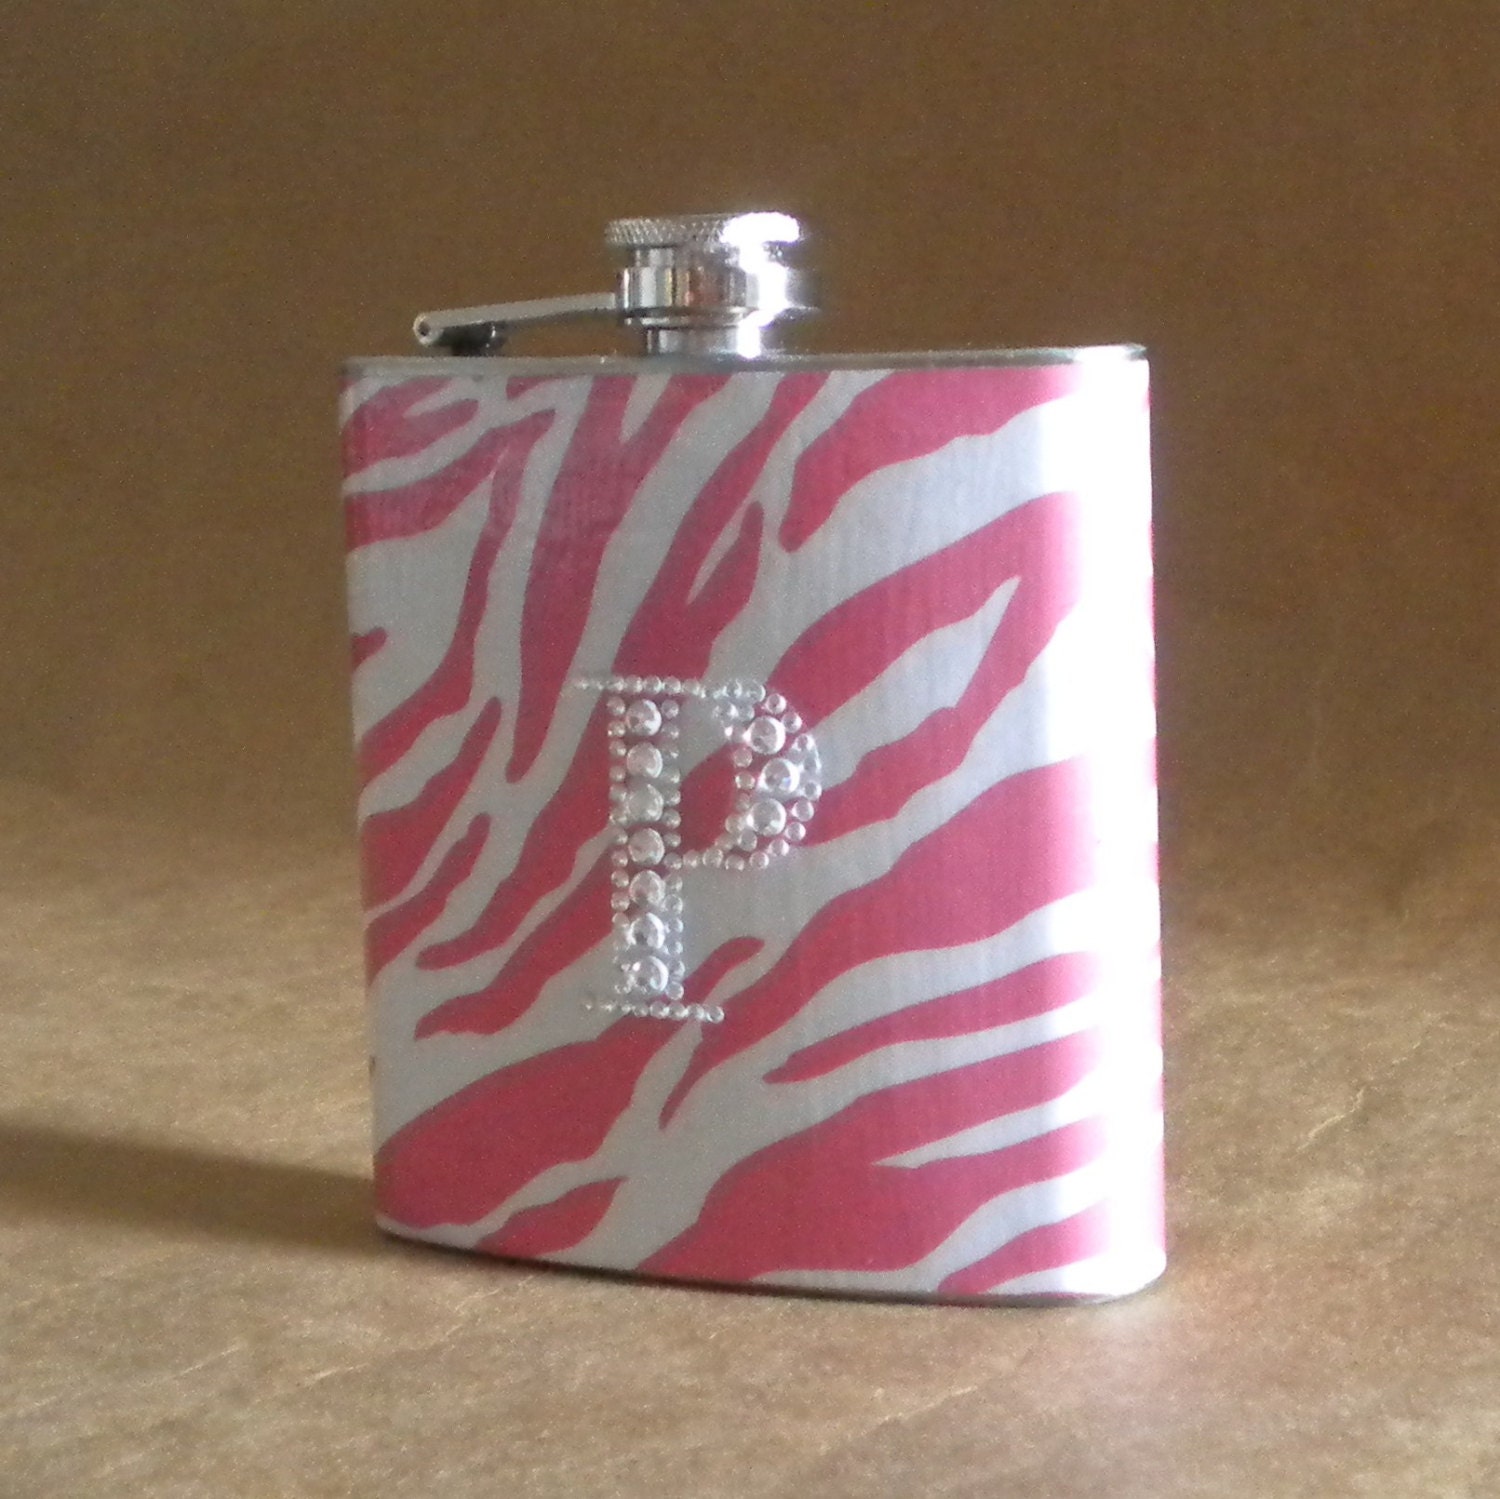 Personalized Girly Bridesmaids GiftPink and White Zebra Print 6 oz Stainless Steel Gift Flask with ANY Rhinestone Initial KR2D 6910